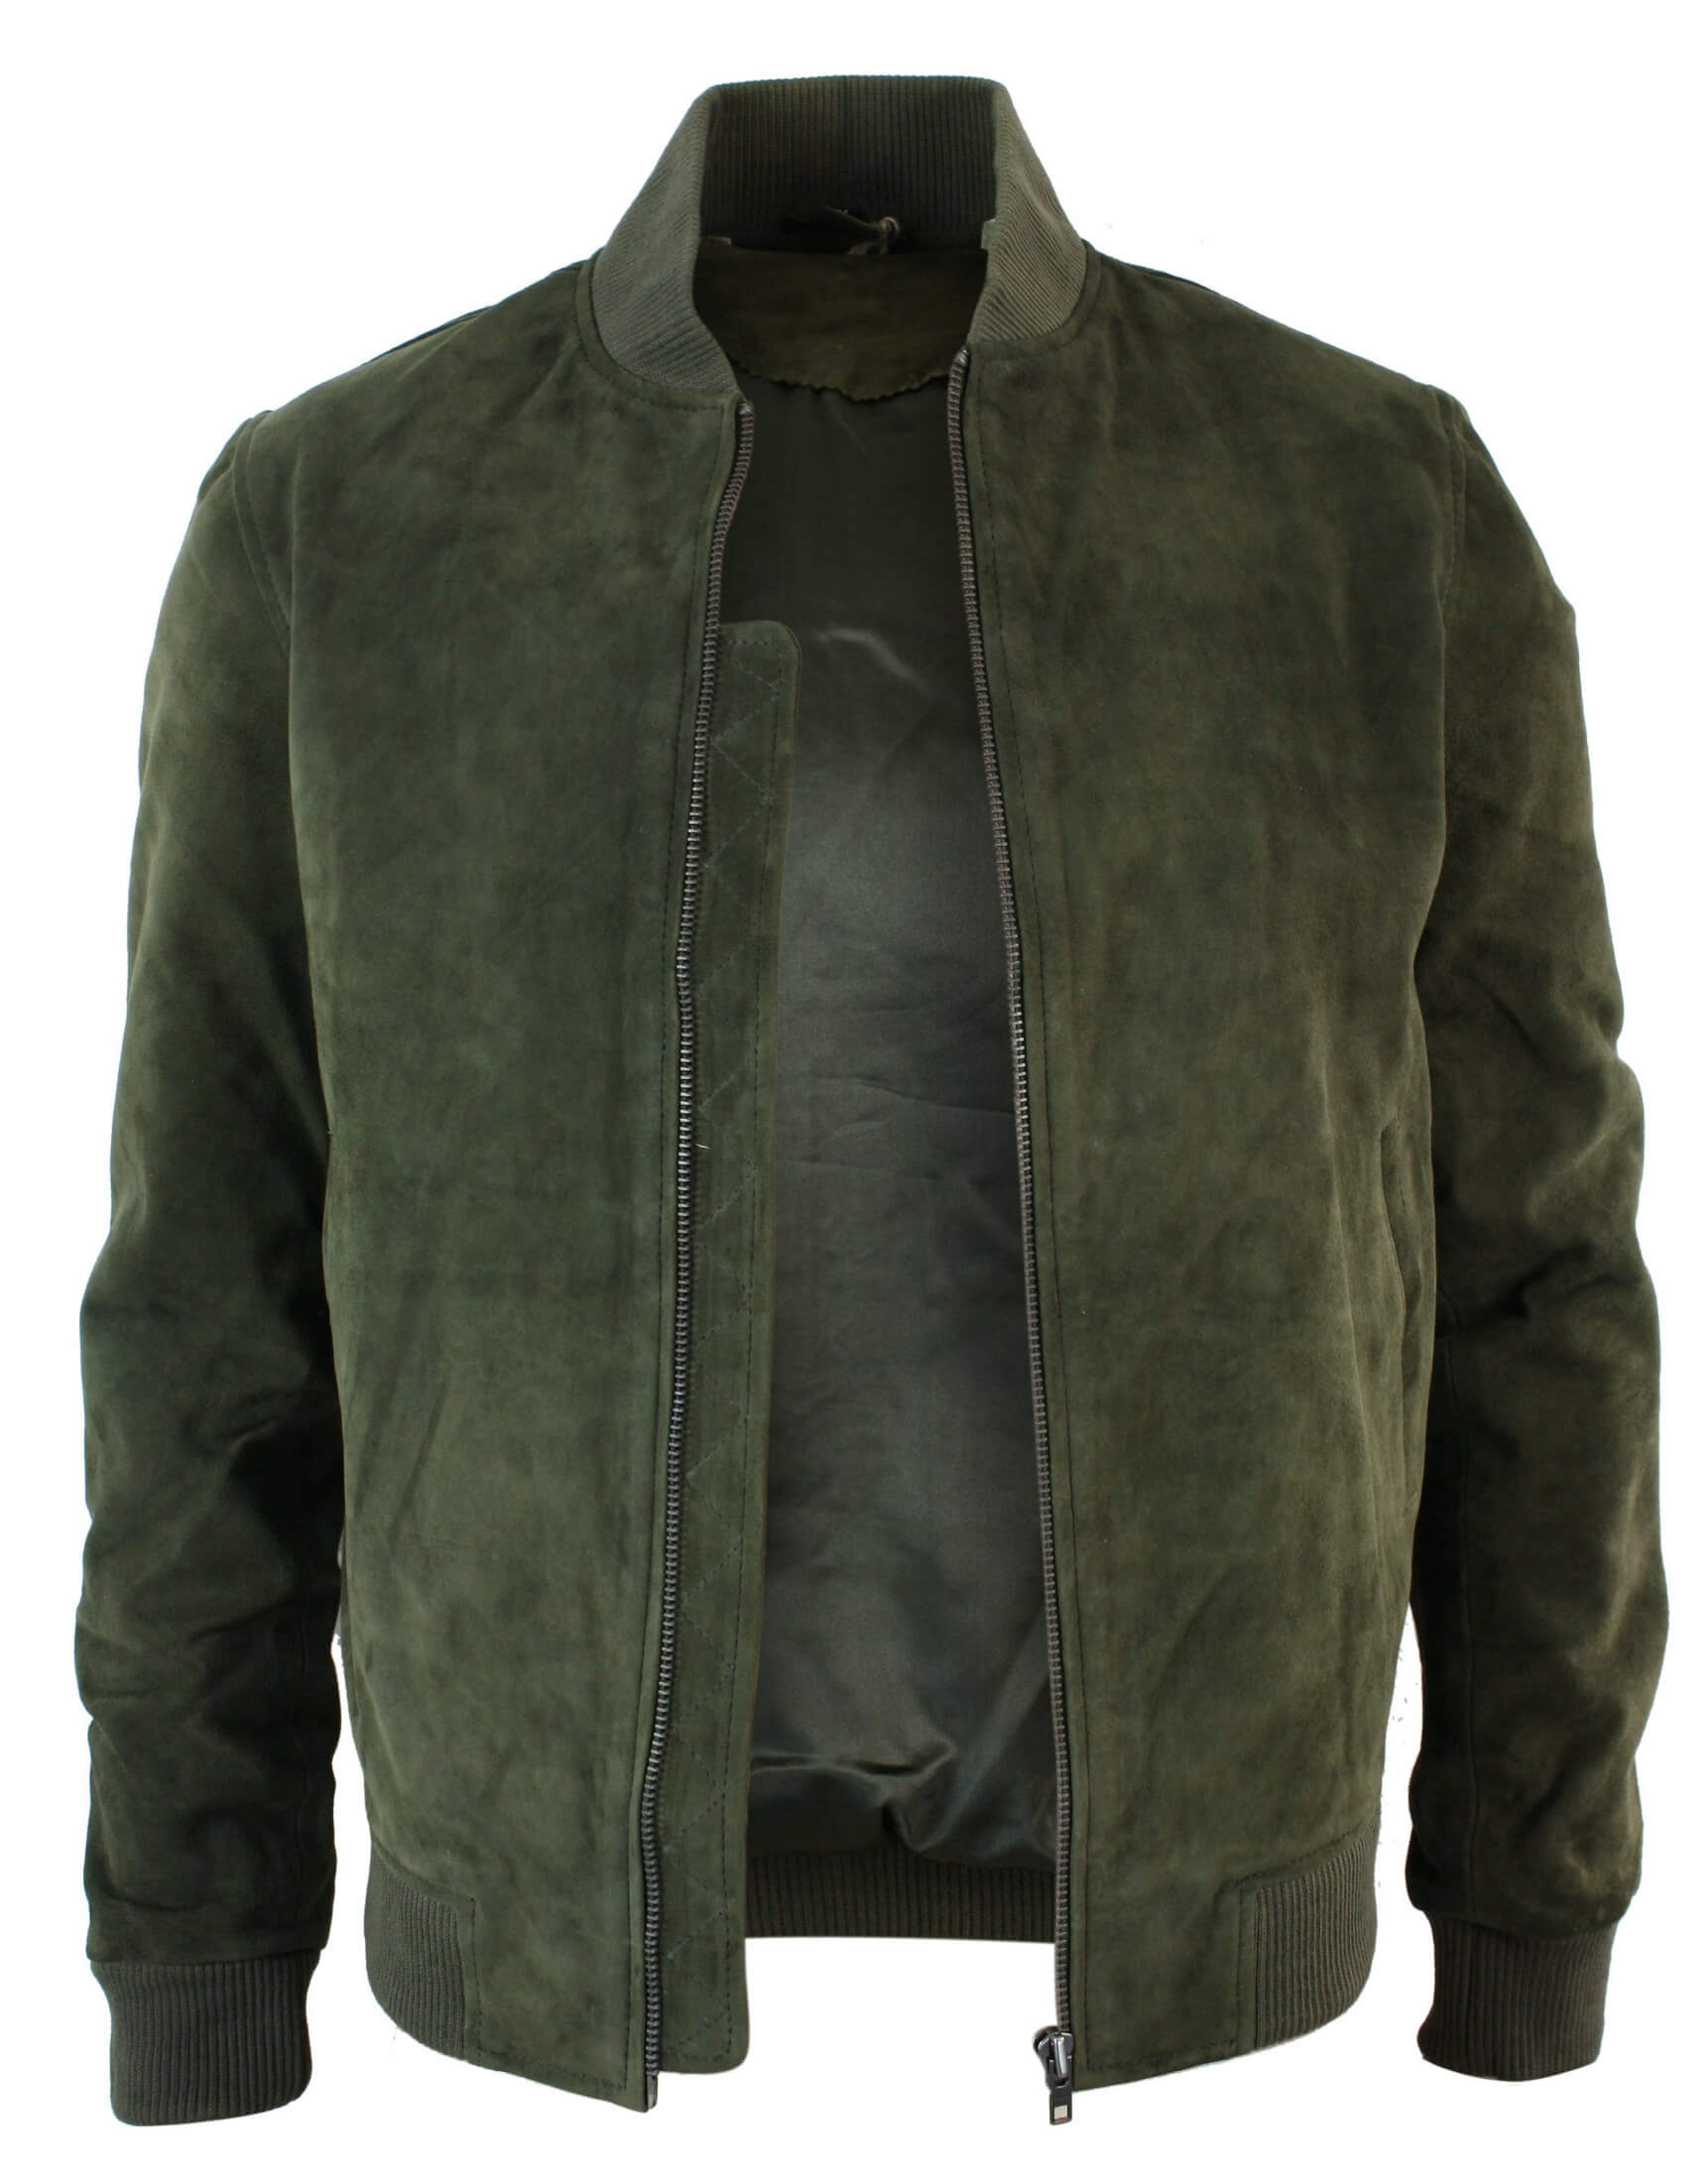 Mens Green Bomber Leather Jacket